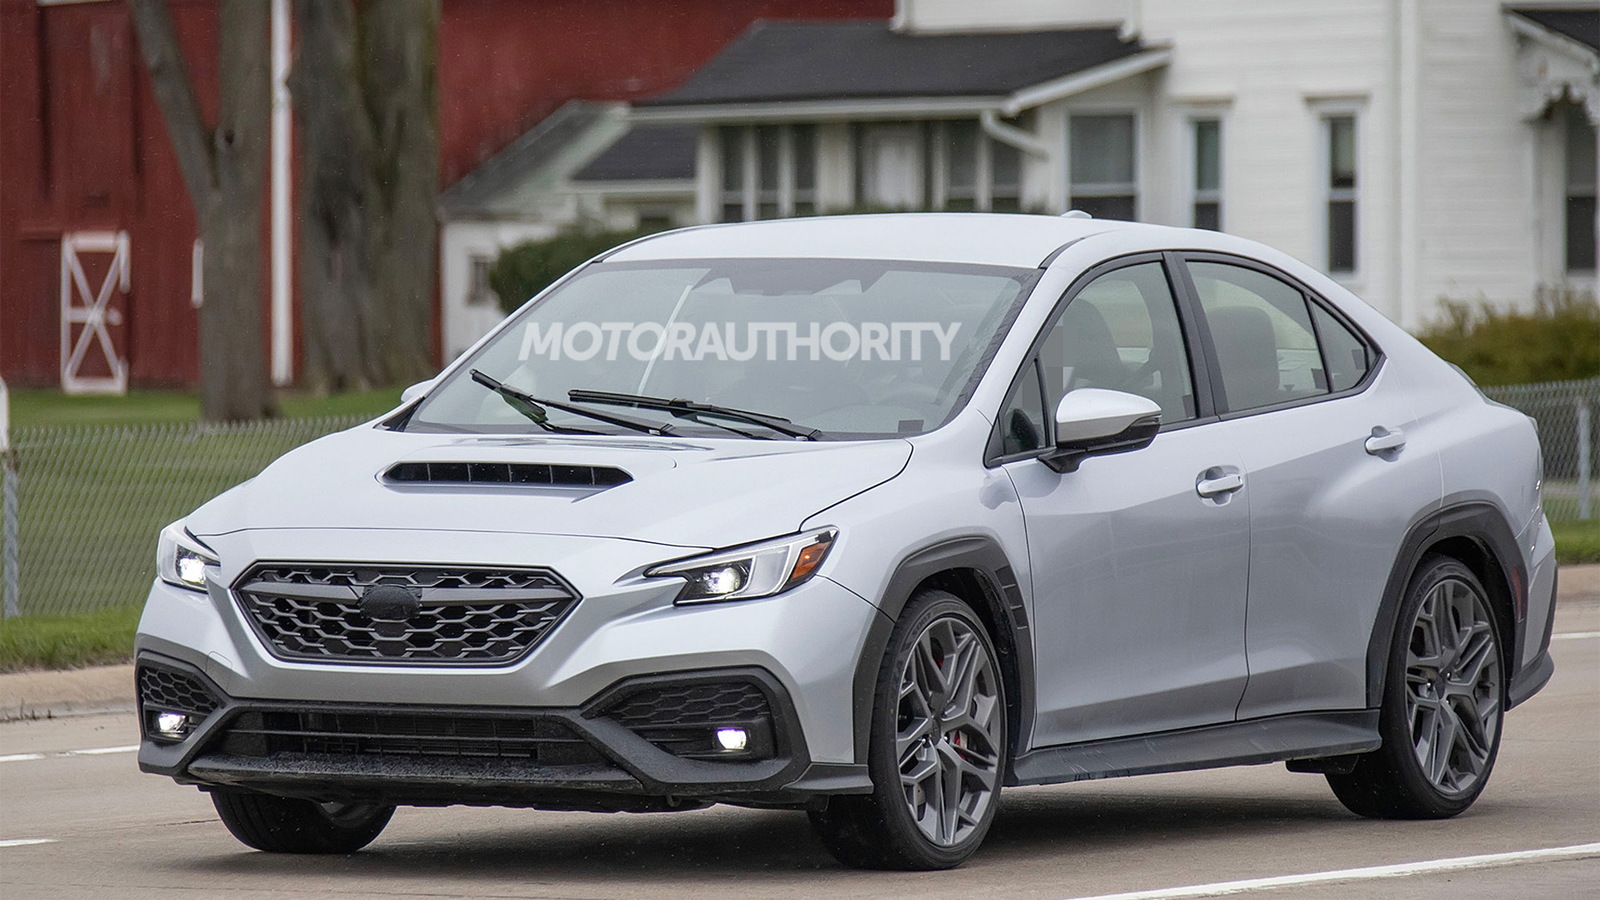 Car Spy Shots, News, Reviews, and Insights Motor Authority